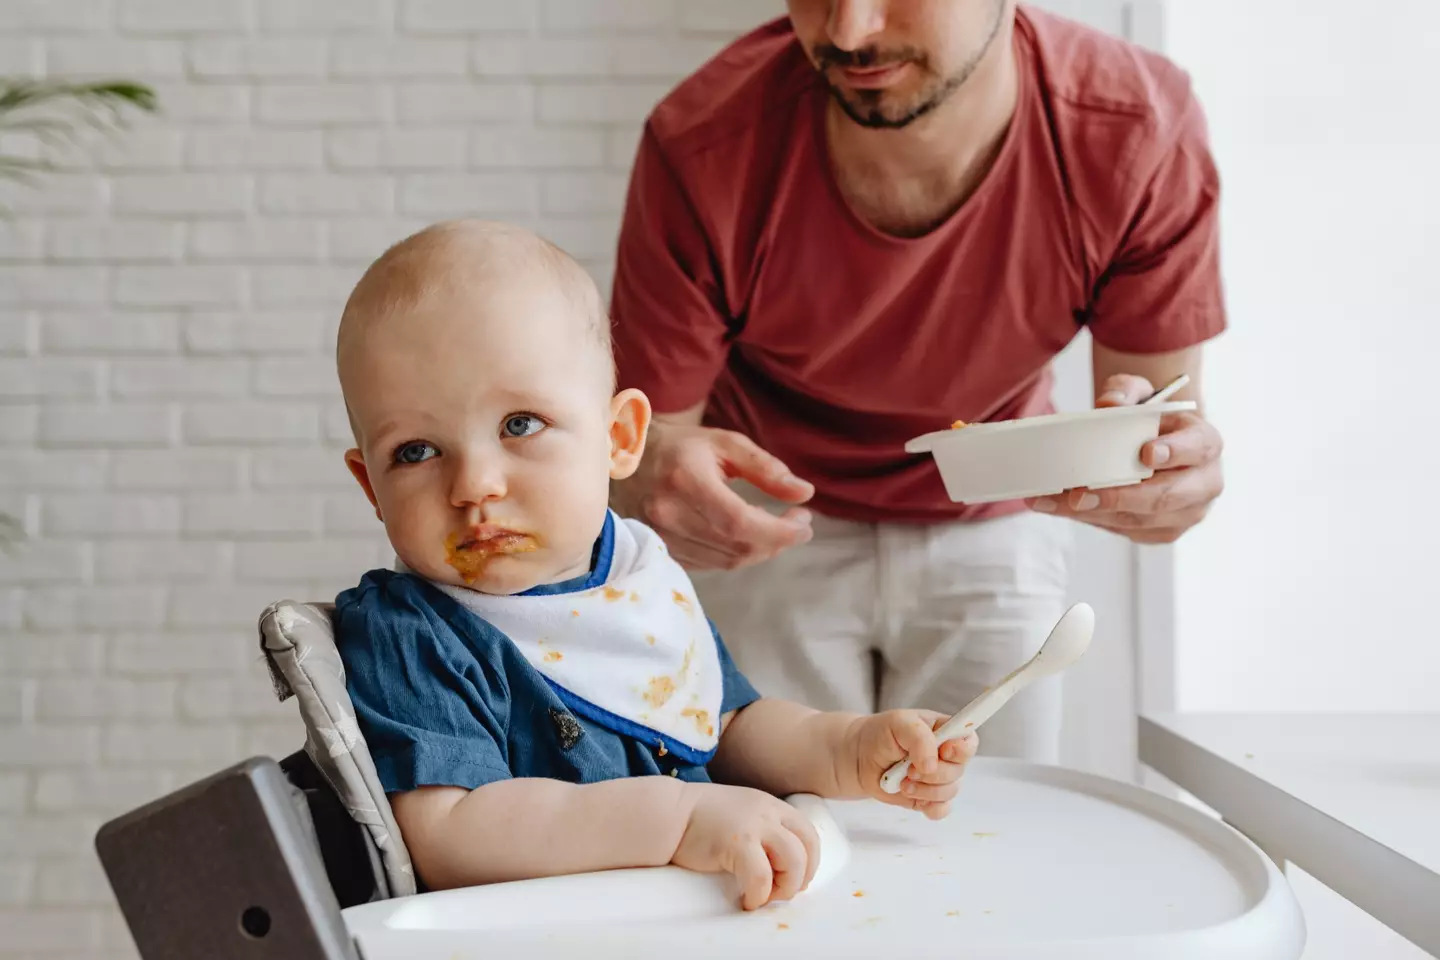 Do you use silicone plates to feed your child?